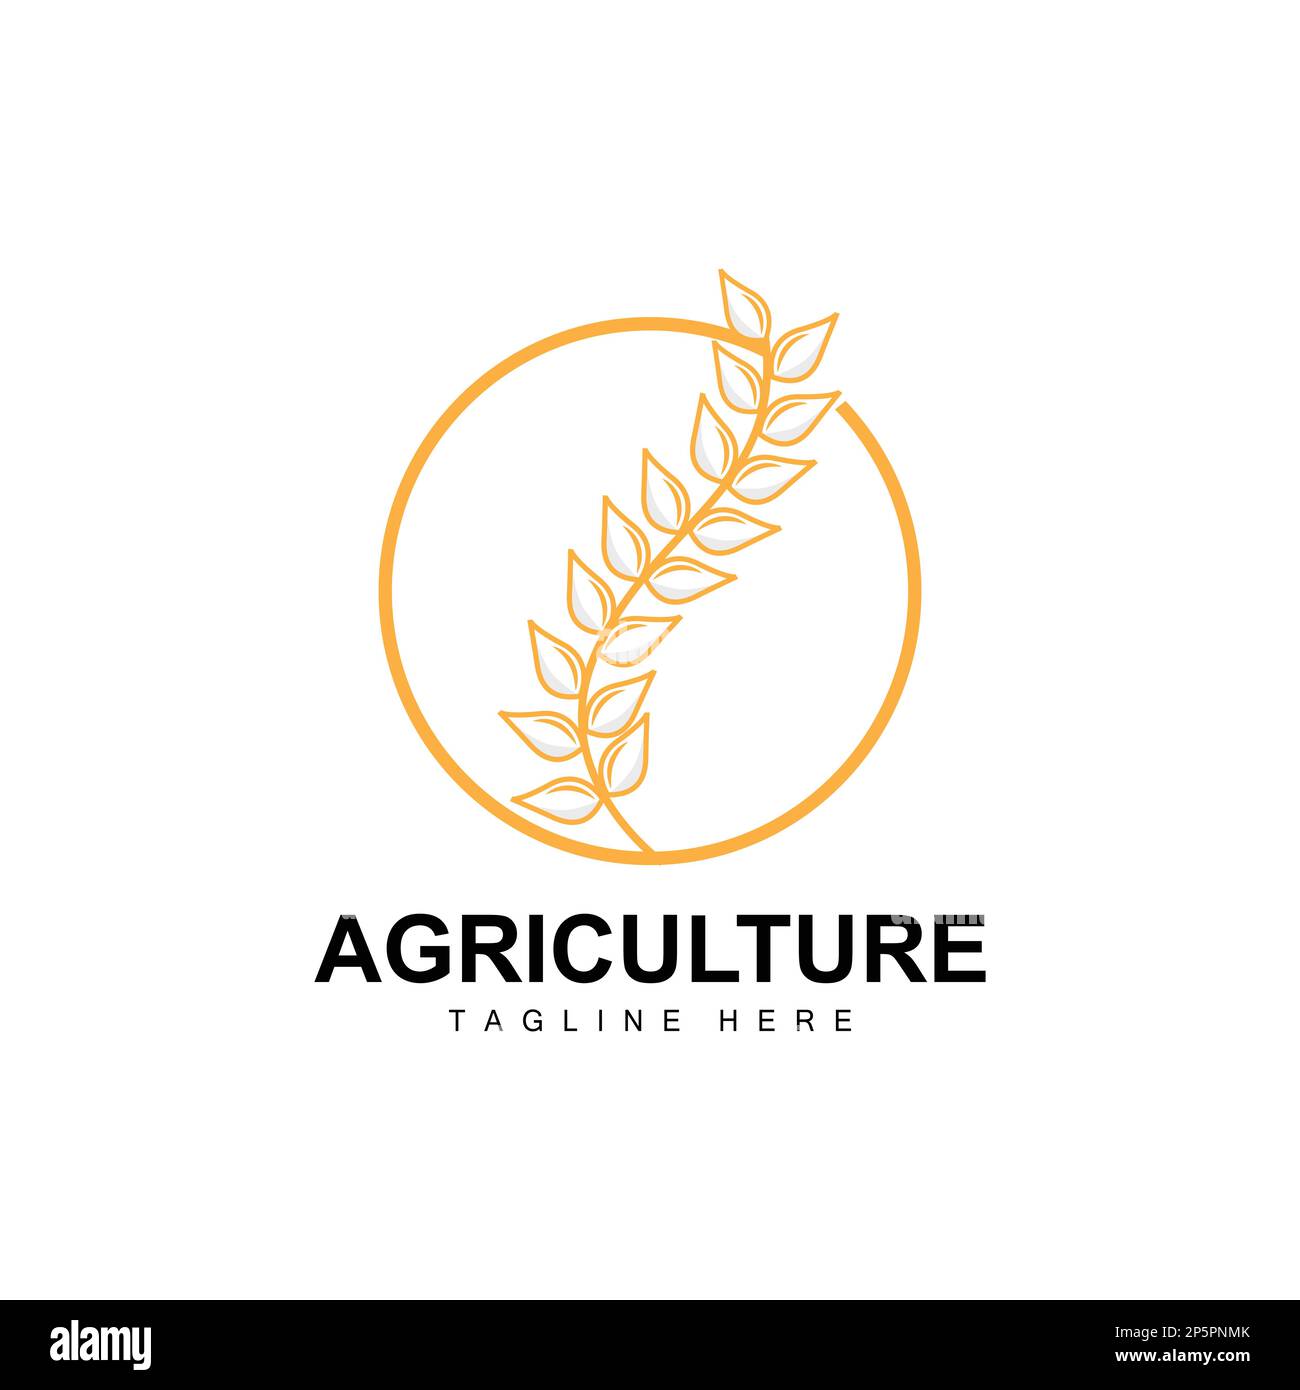 Rice Logo, Agriculture Design, Vector Wheat Rice Icon Template Illustration Stock Vector